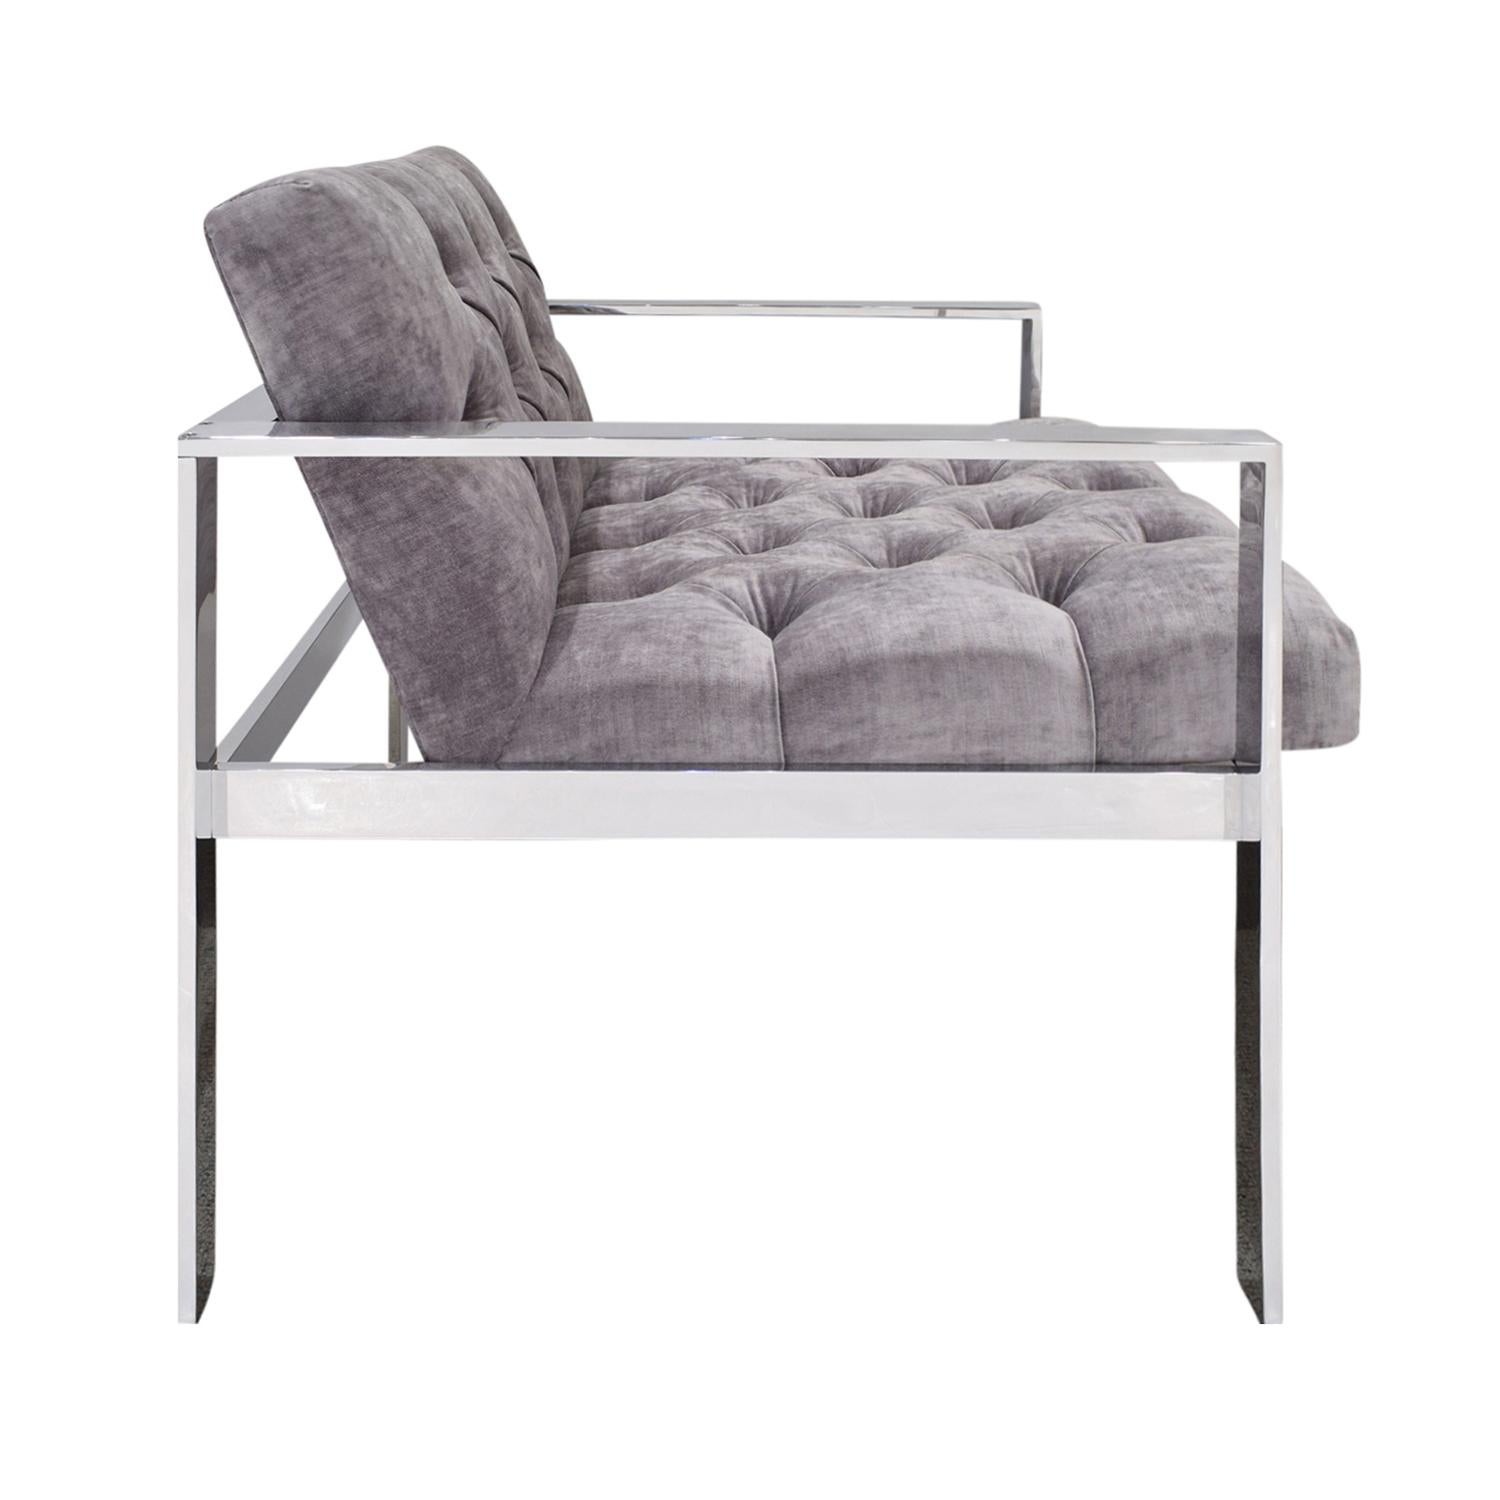 Lounge chair No. 1427A with polished aluminum frame and diamond tufted seat and back by Harvey Probber, American 1960’s. Aluminum polished and reupholstered in velvet by Lobel Modern. 

This lounge chair was part of the retrospective at the New York